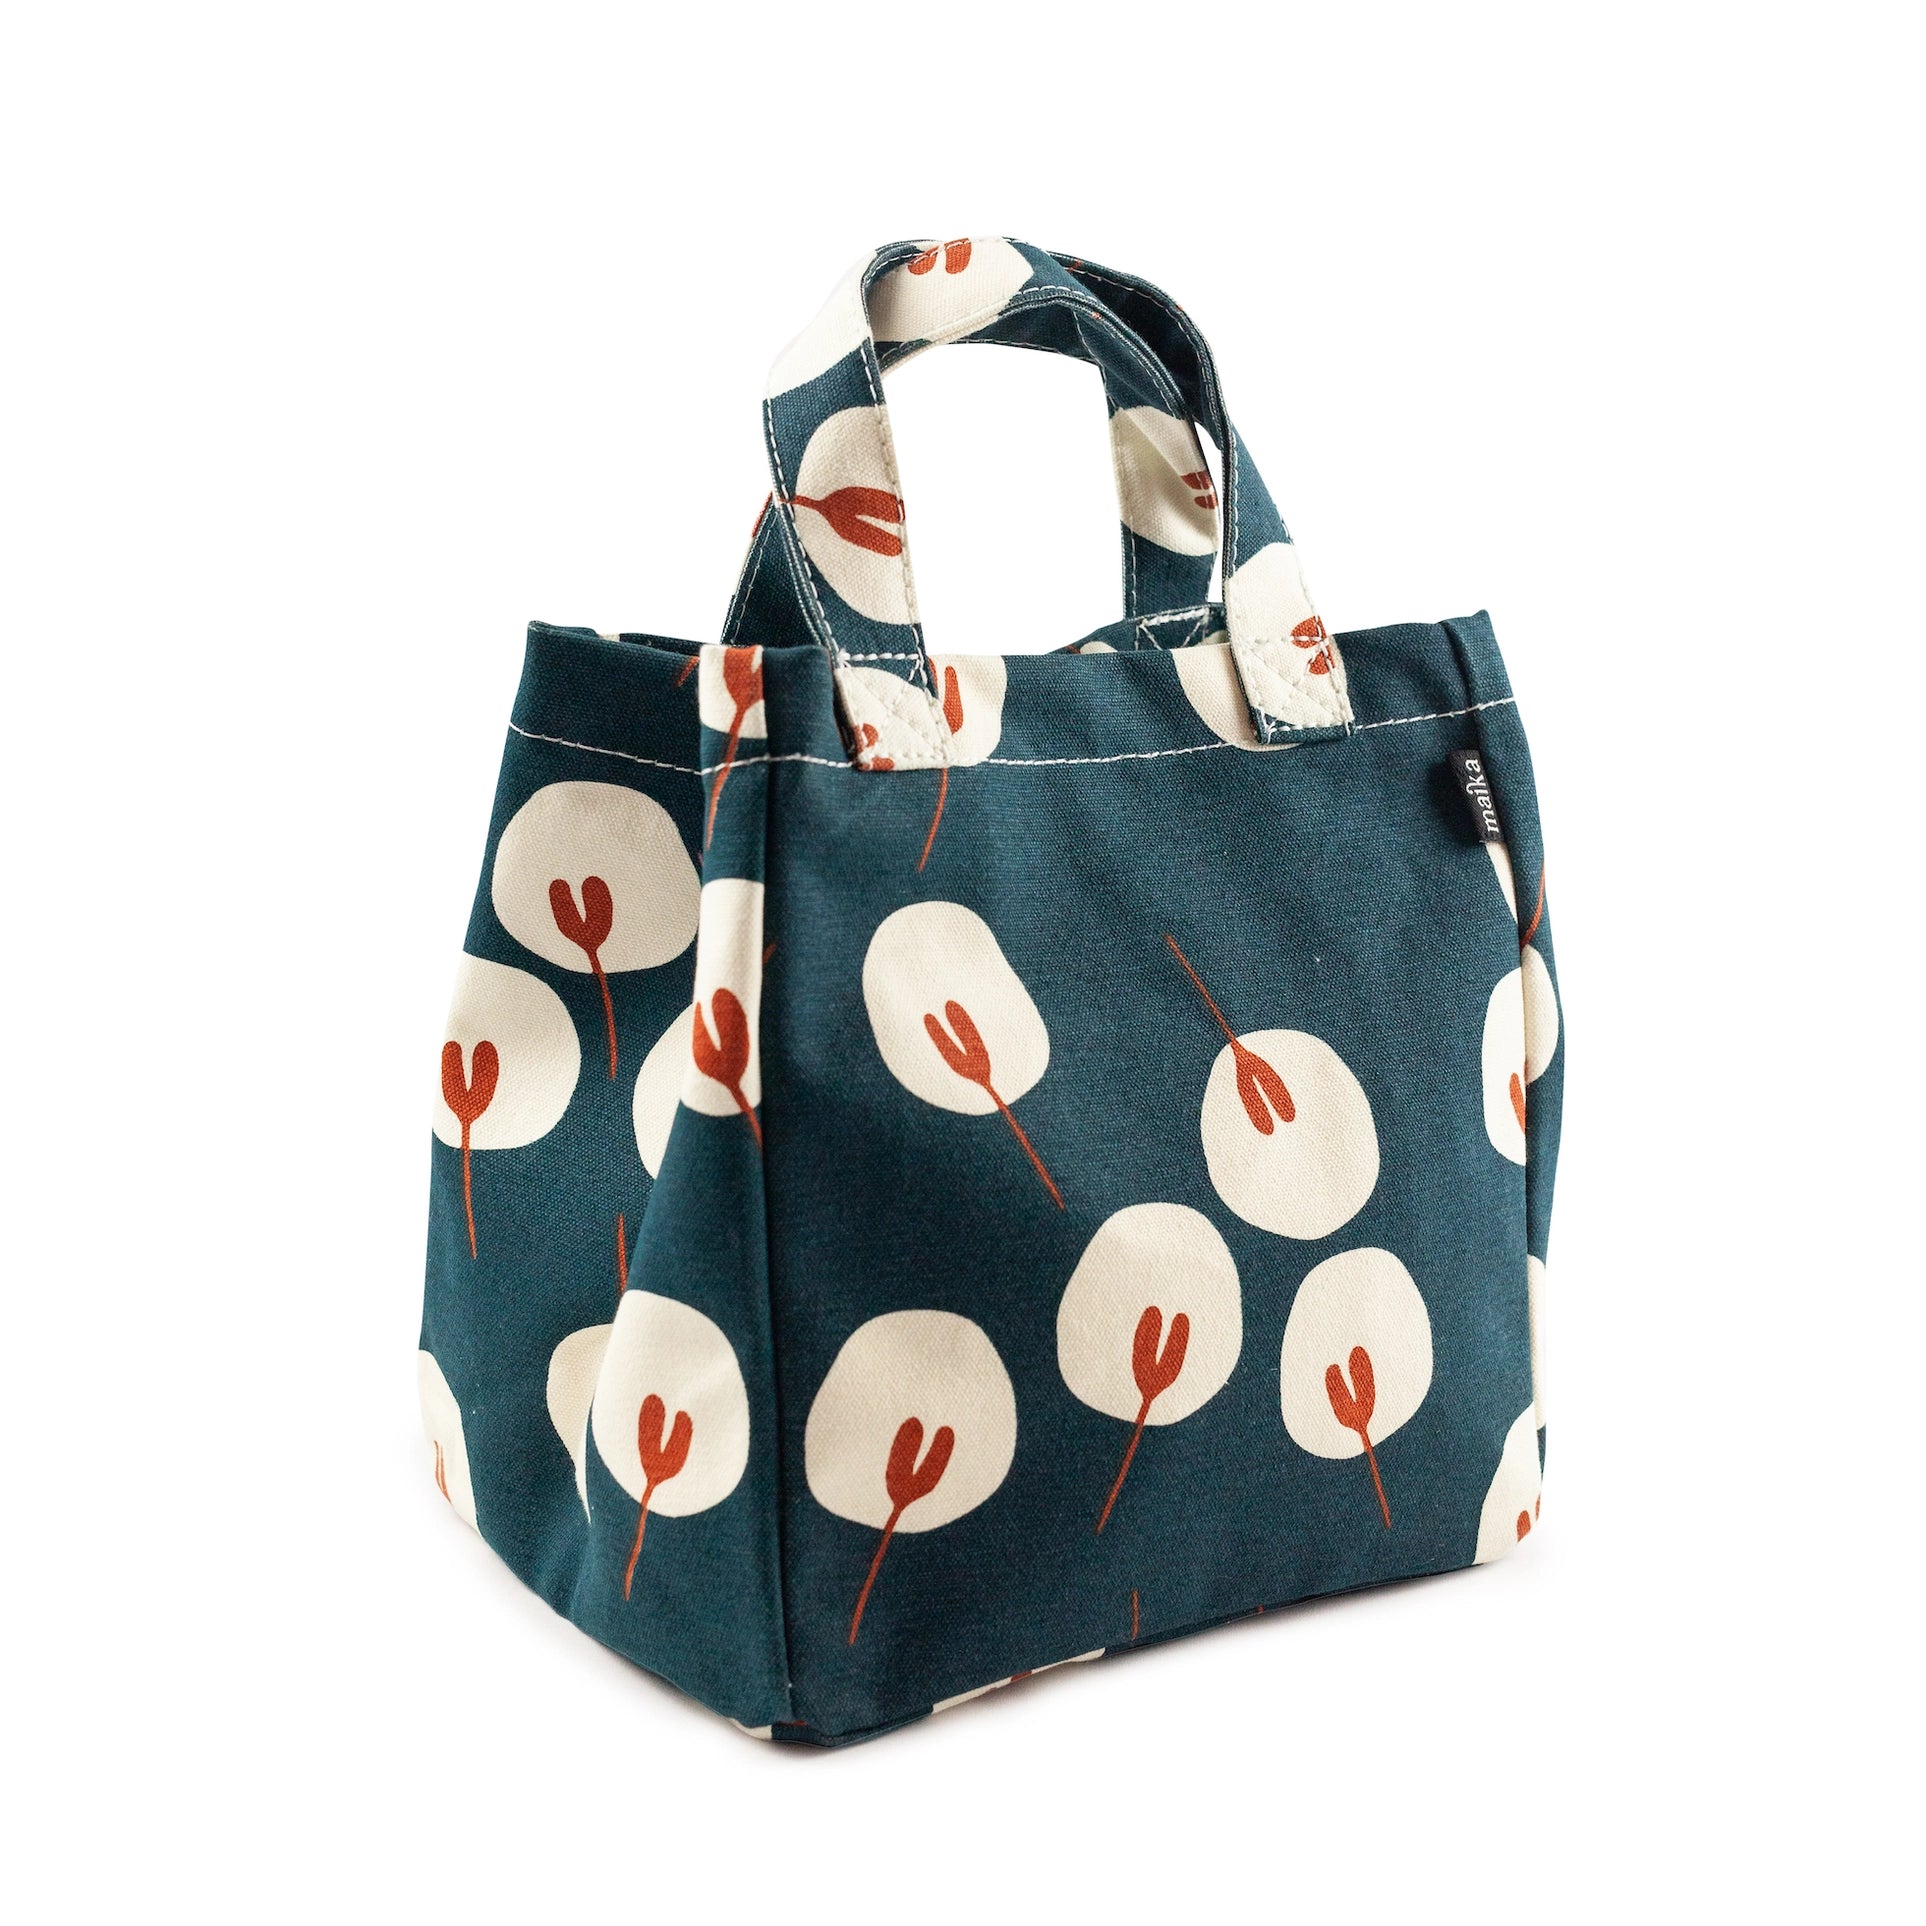 Maika Lunch Tote Project Bag